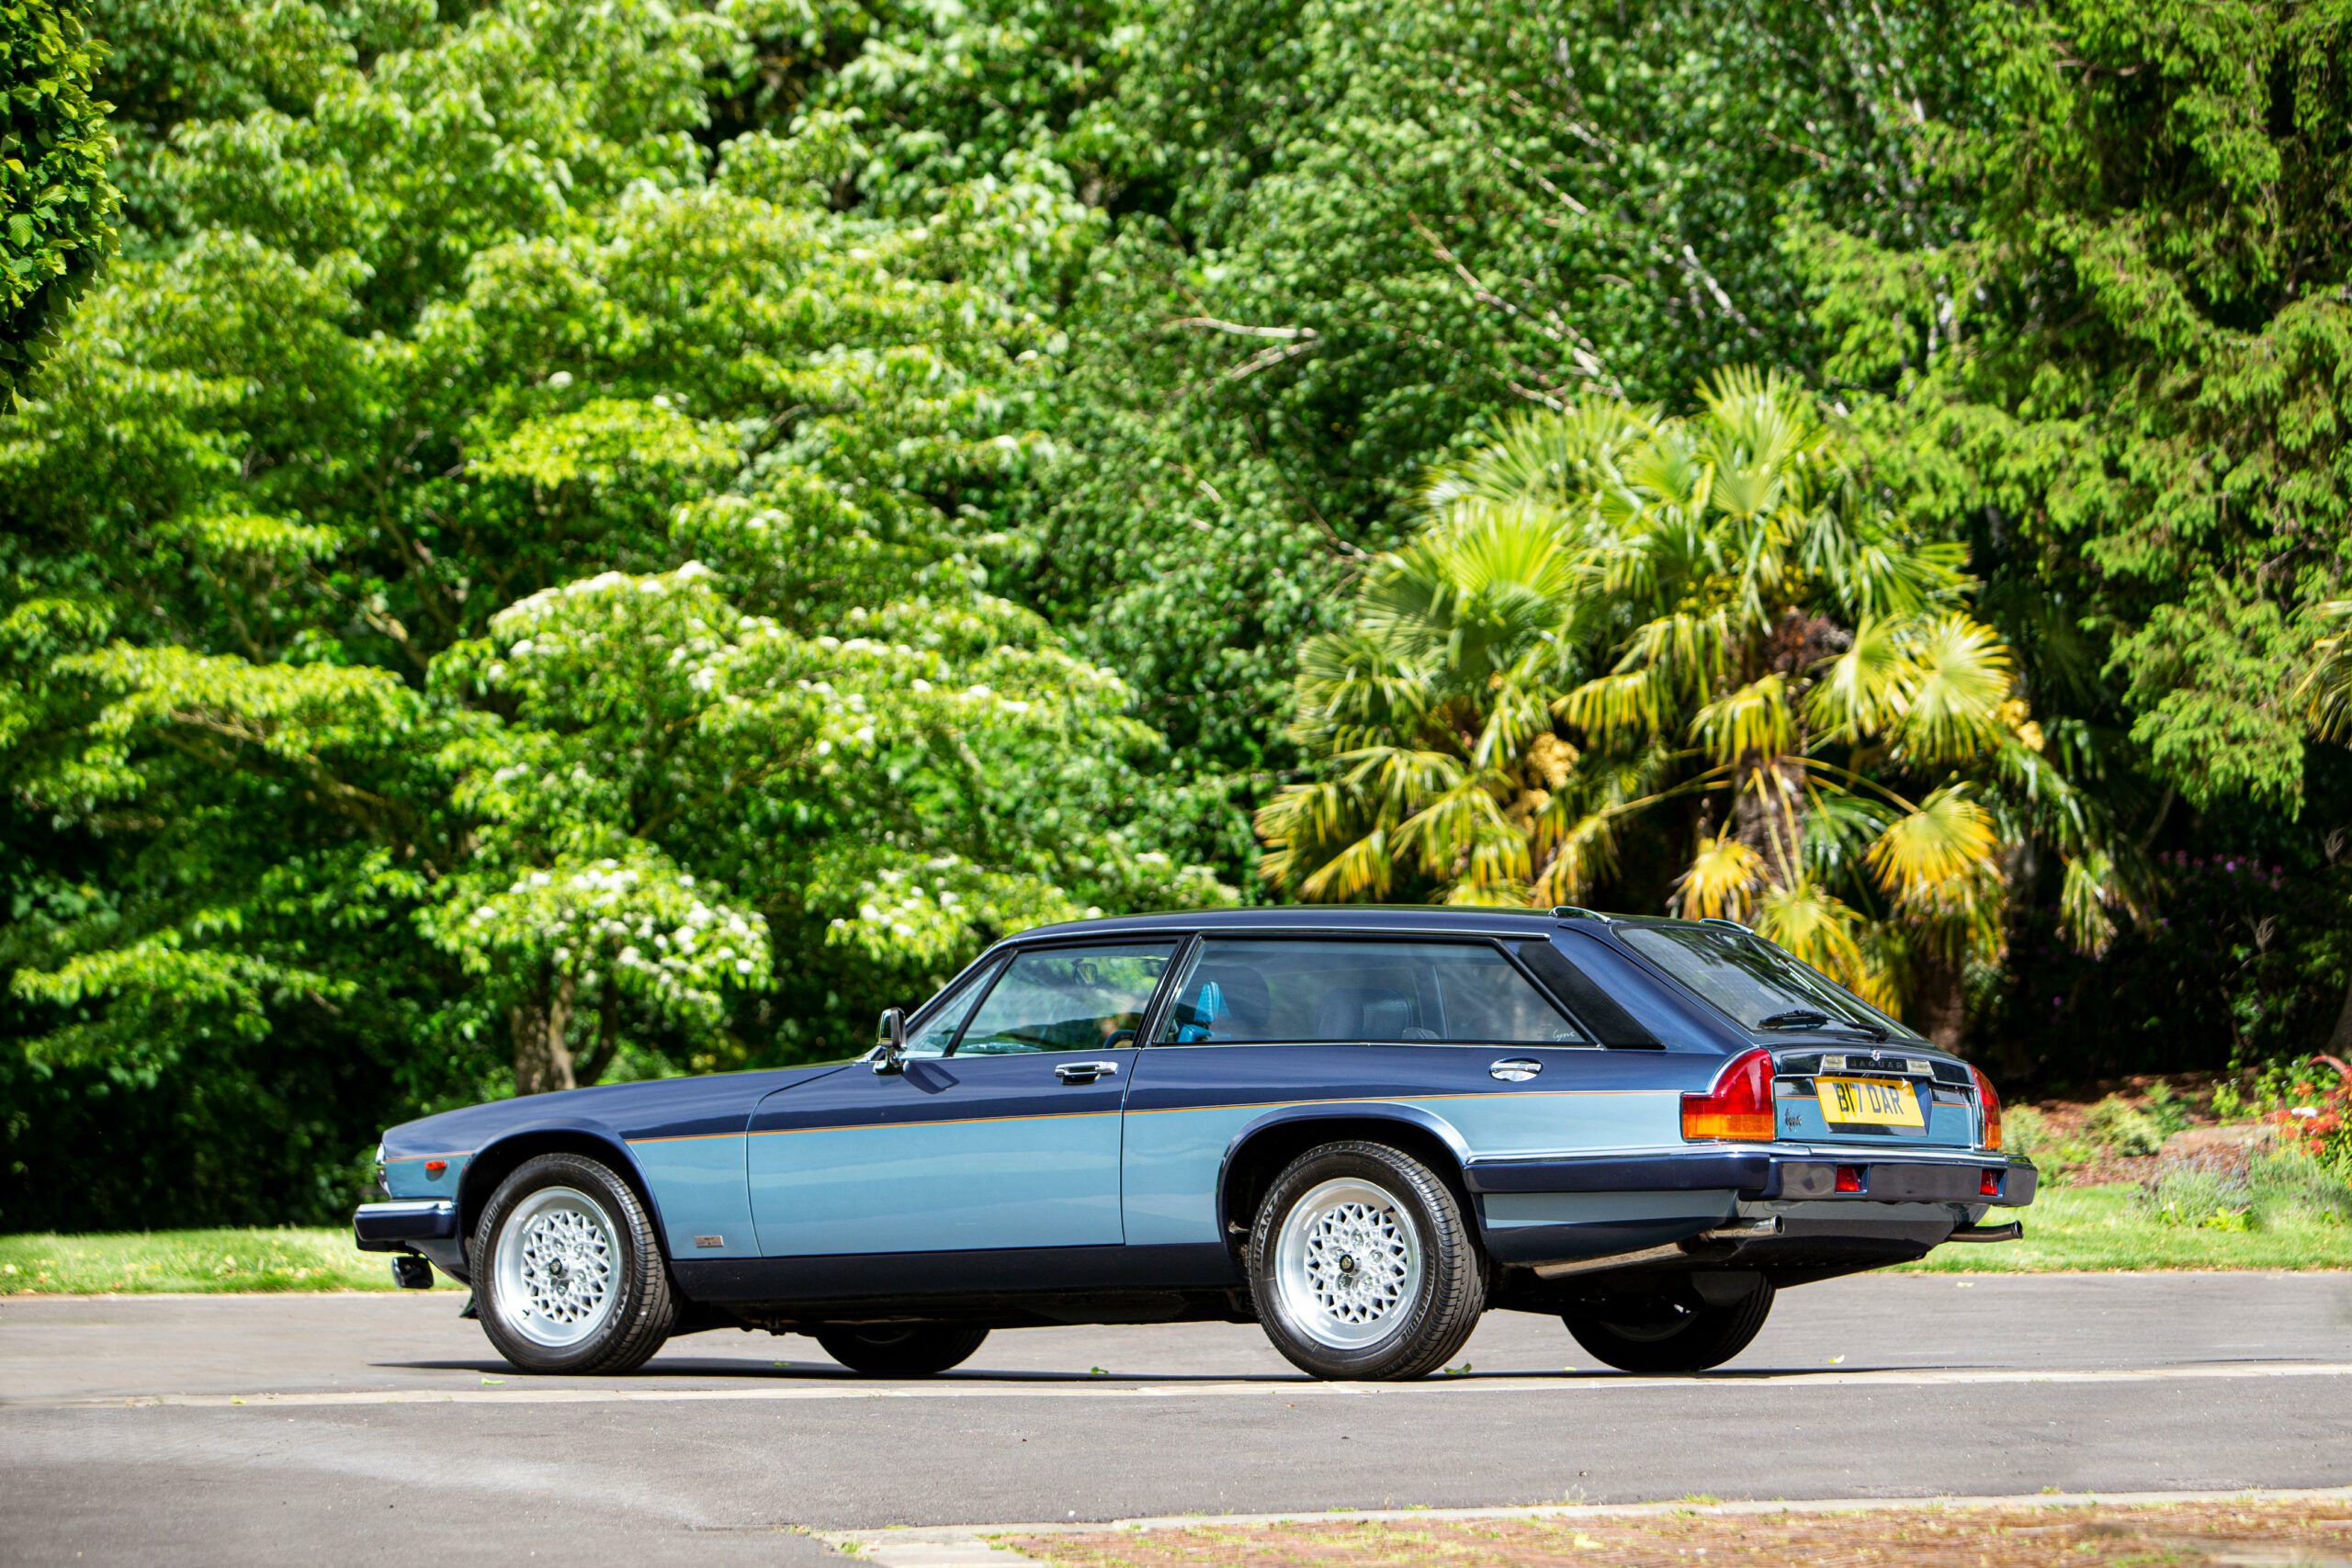 The Jaguar XJS disposable shot brake came from the Gucci house